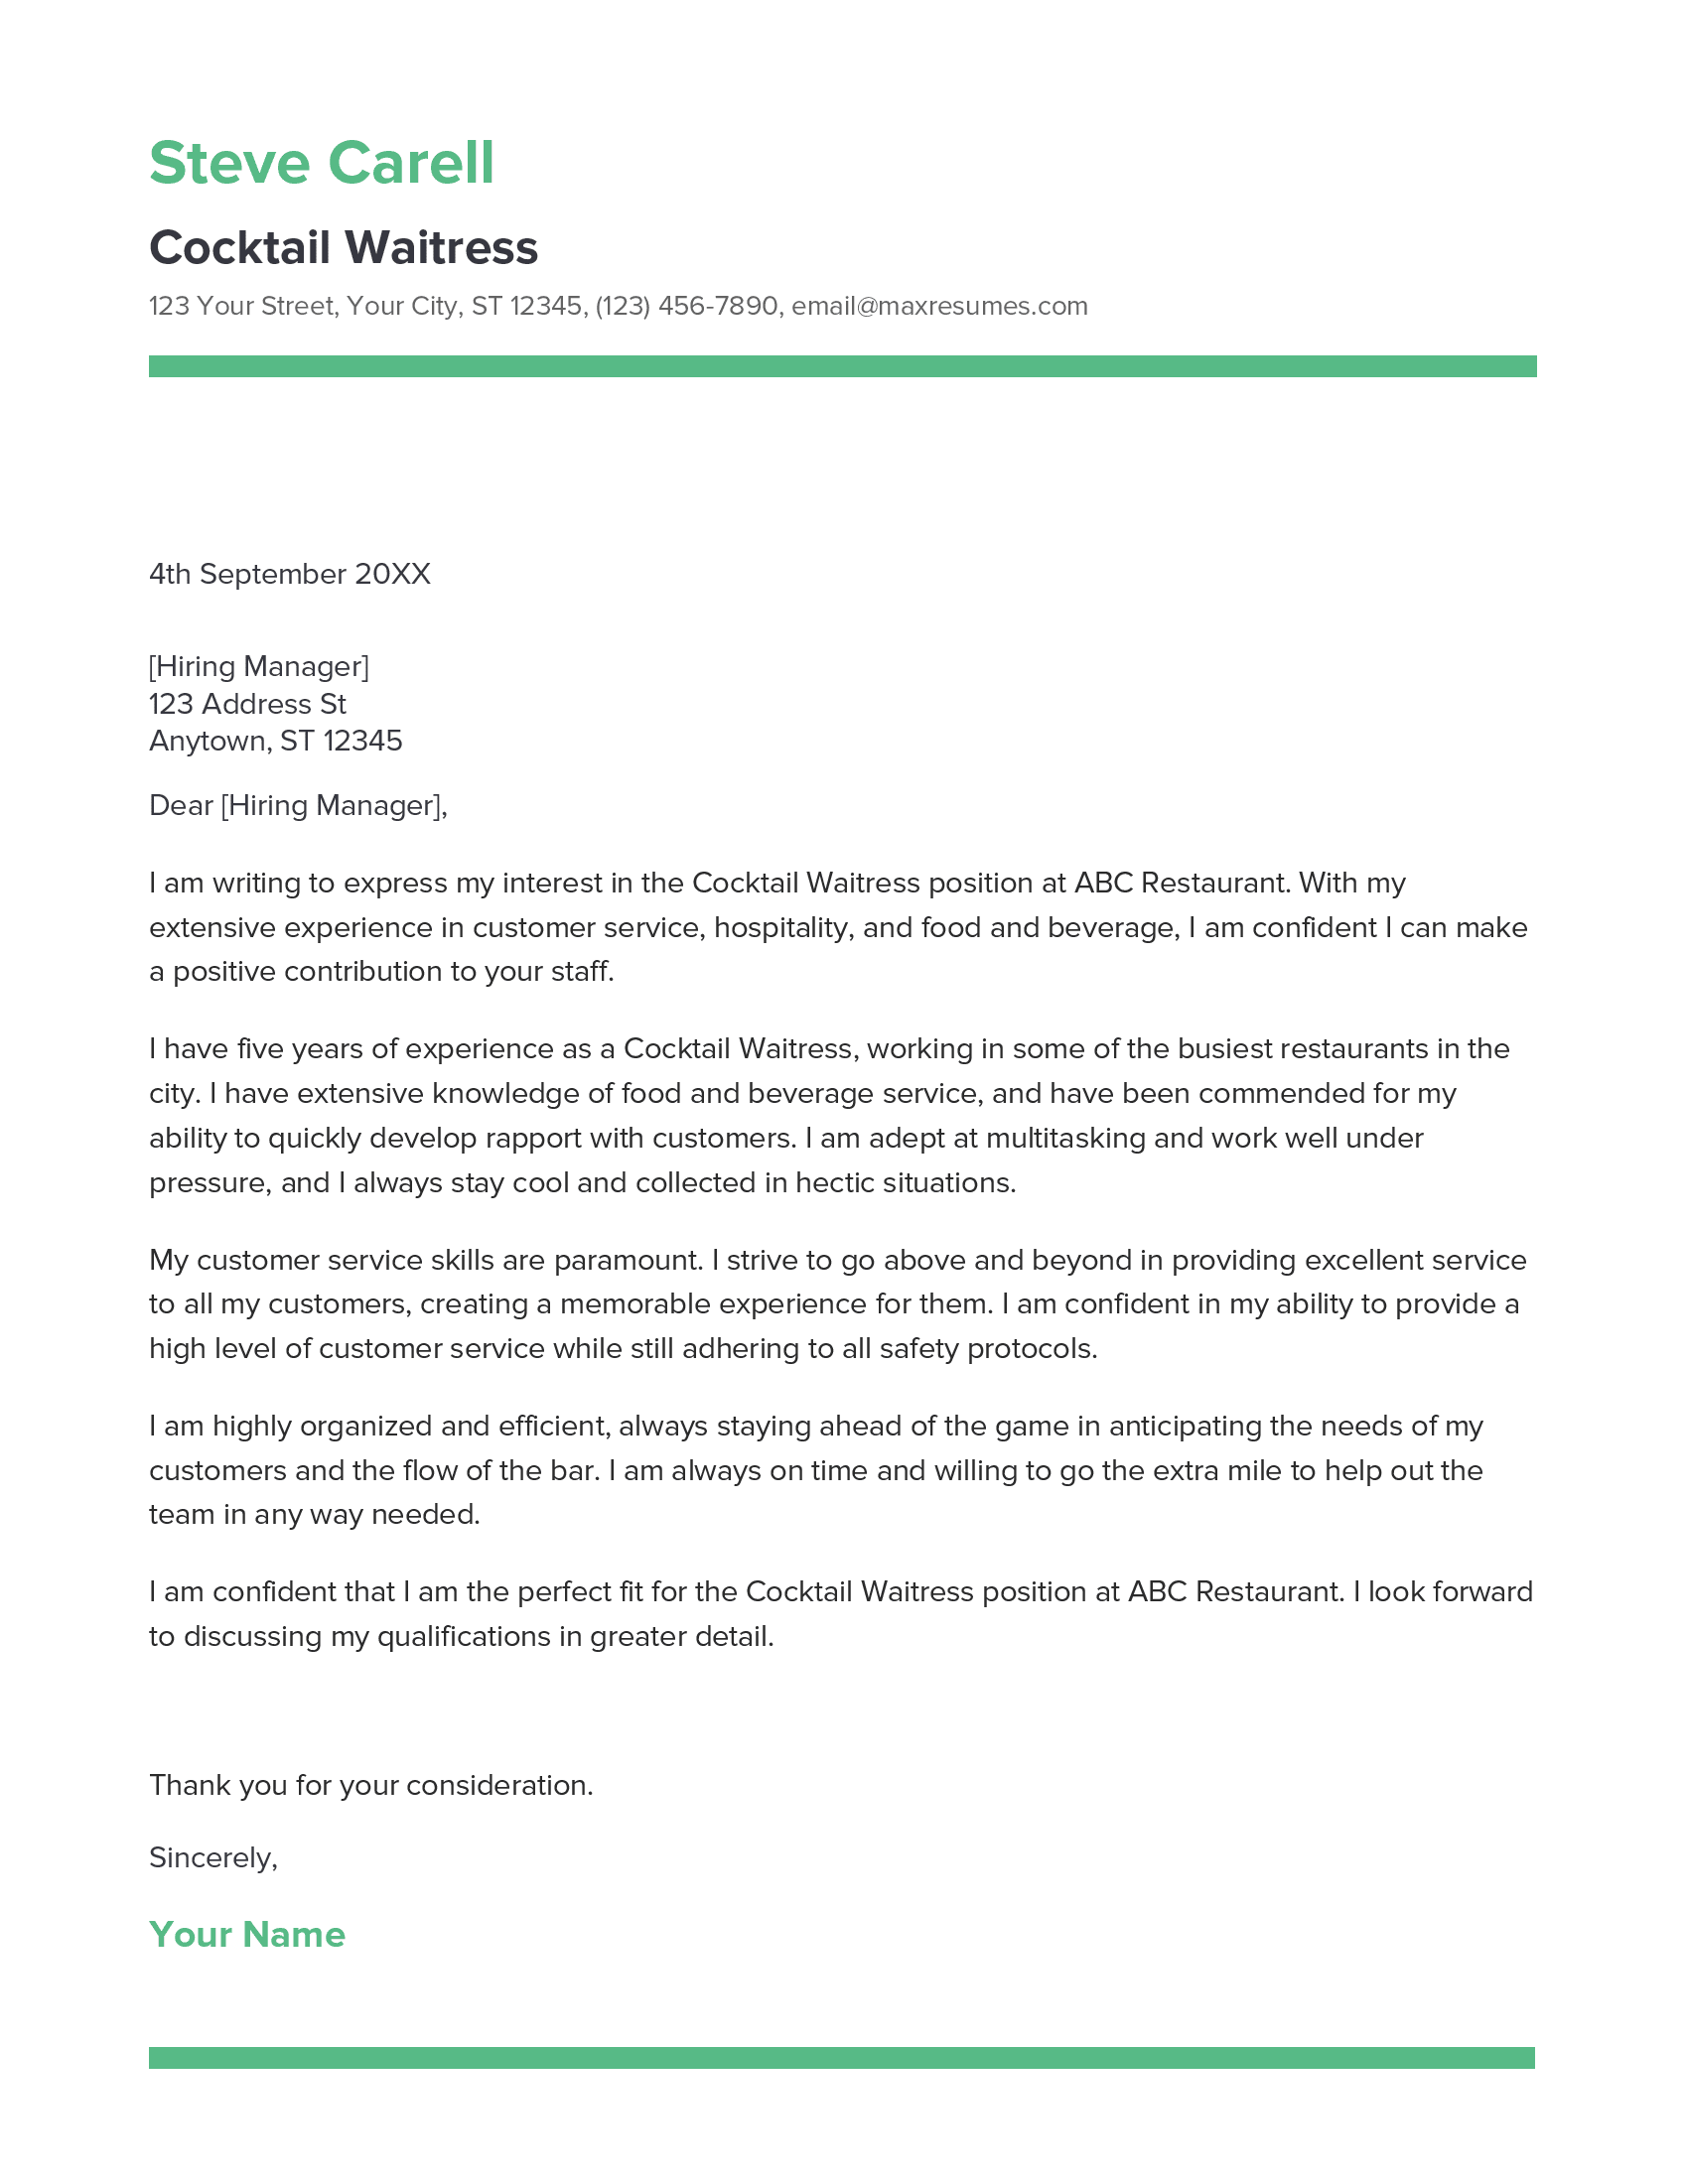 Cocktail Waitress Cover Letter Example